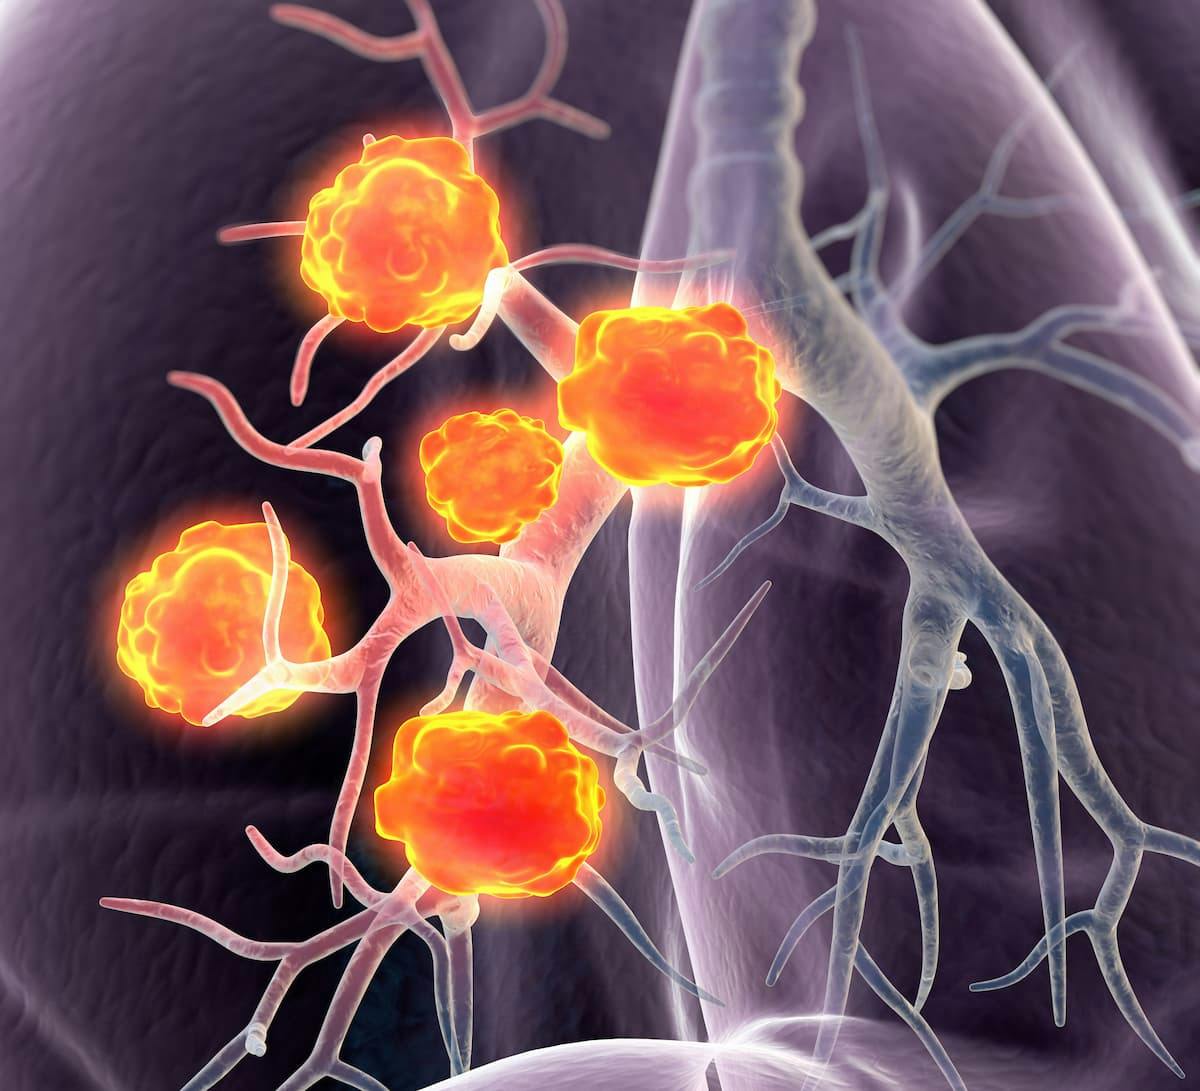 DFS Benefit Noted Across Patient Subgroups for Adjuvant Atezolizumab in Early-Stage NSCLC